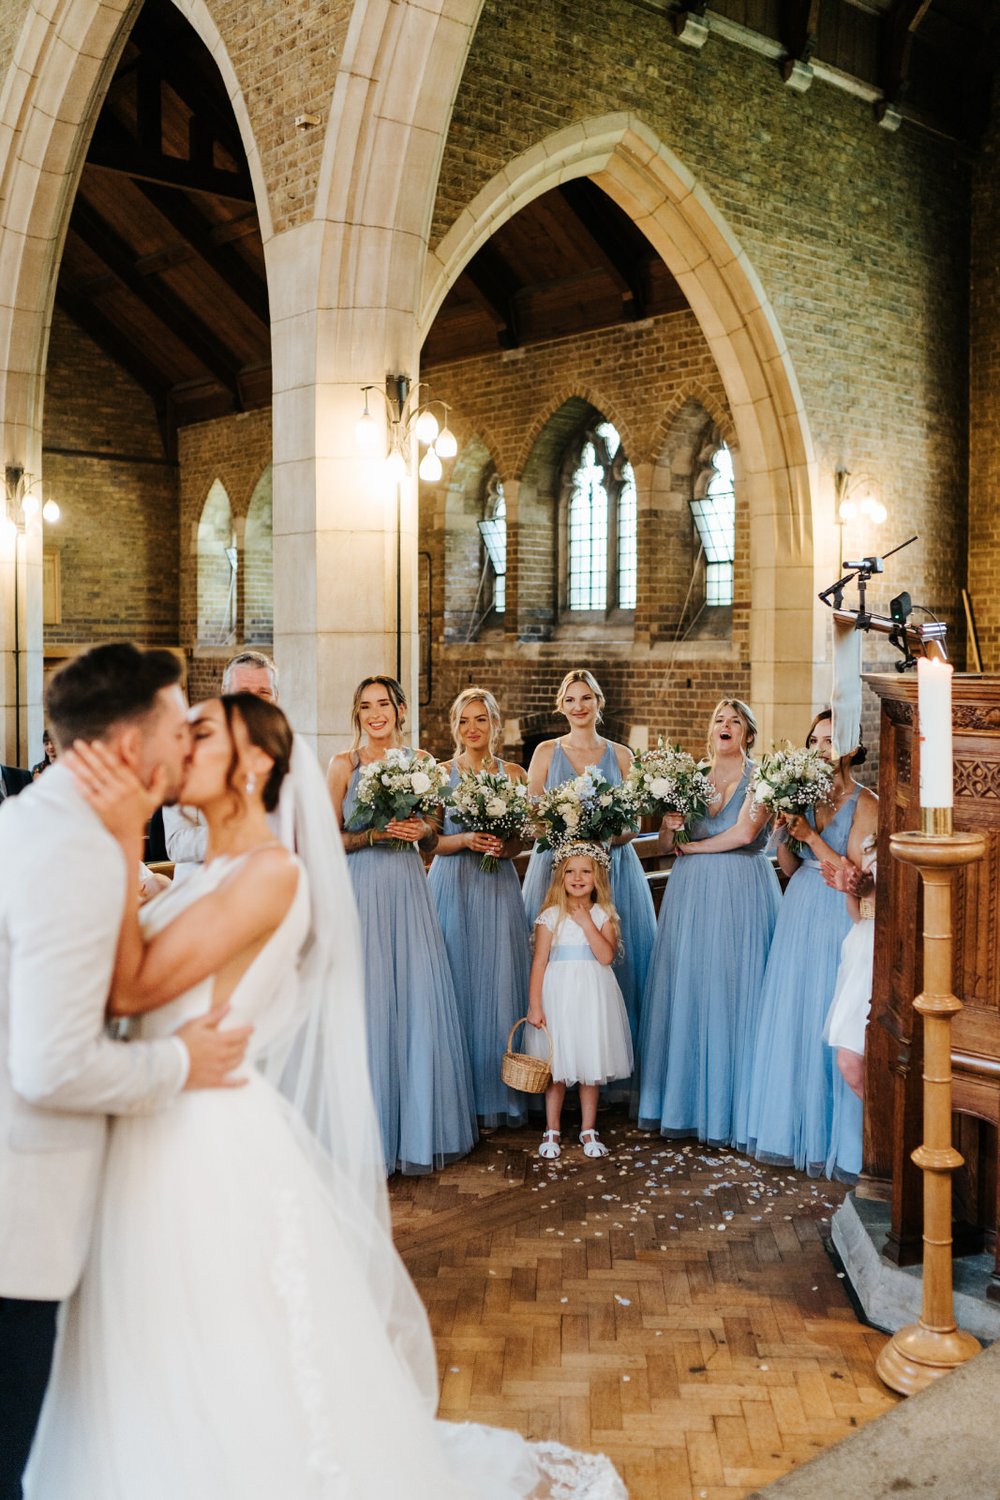 Photograph taken from the altar of the bride and groom, out of focus, sharing their first kiss while bridesmaids smile in the background